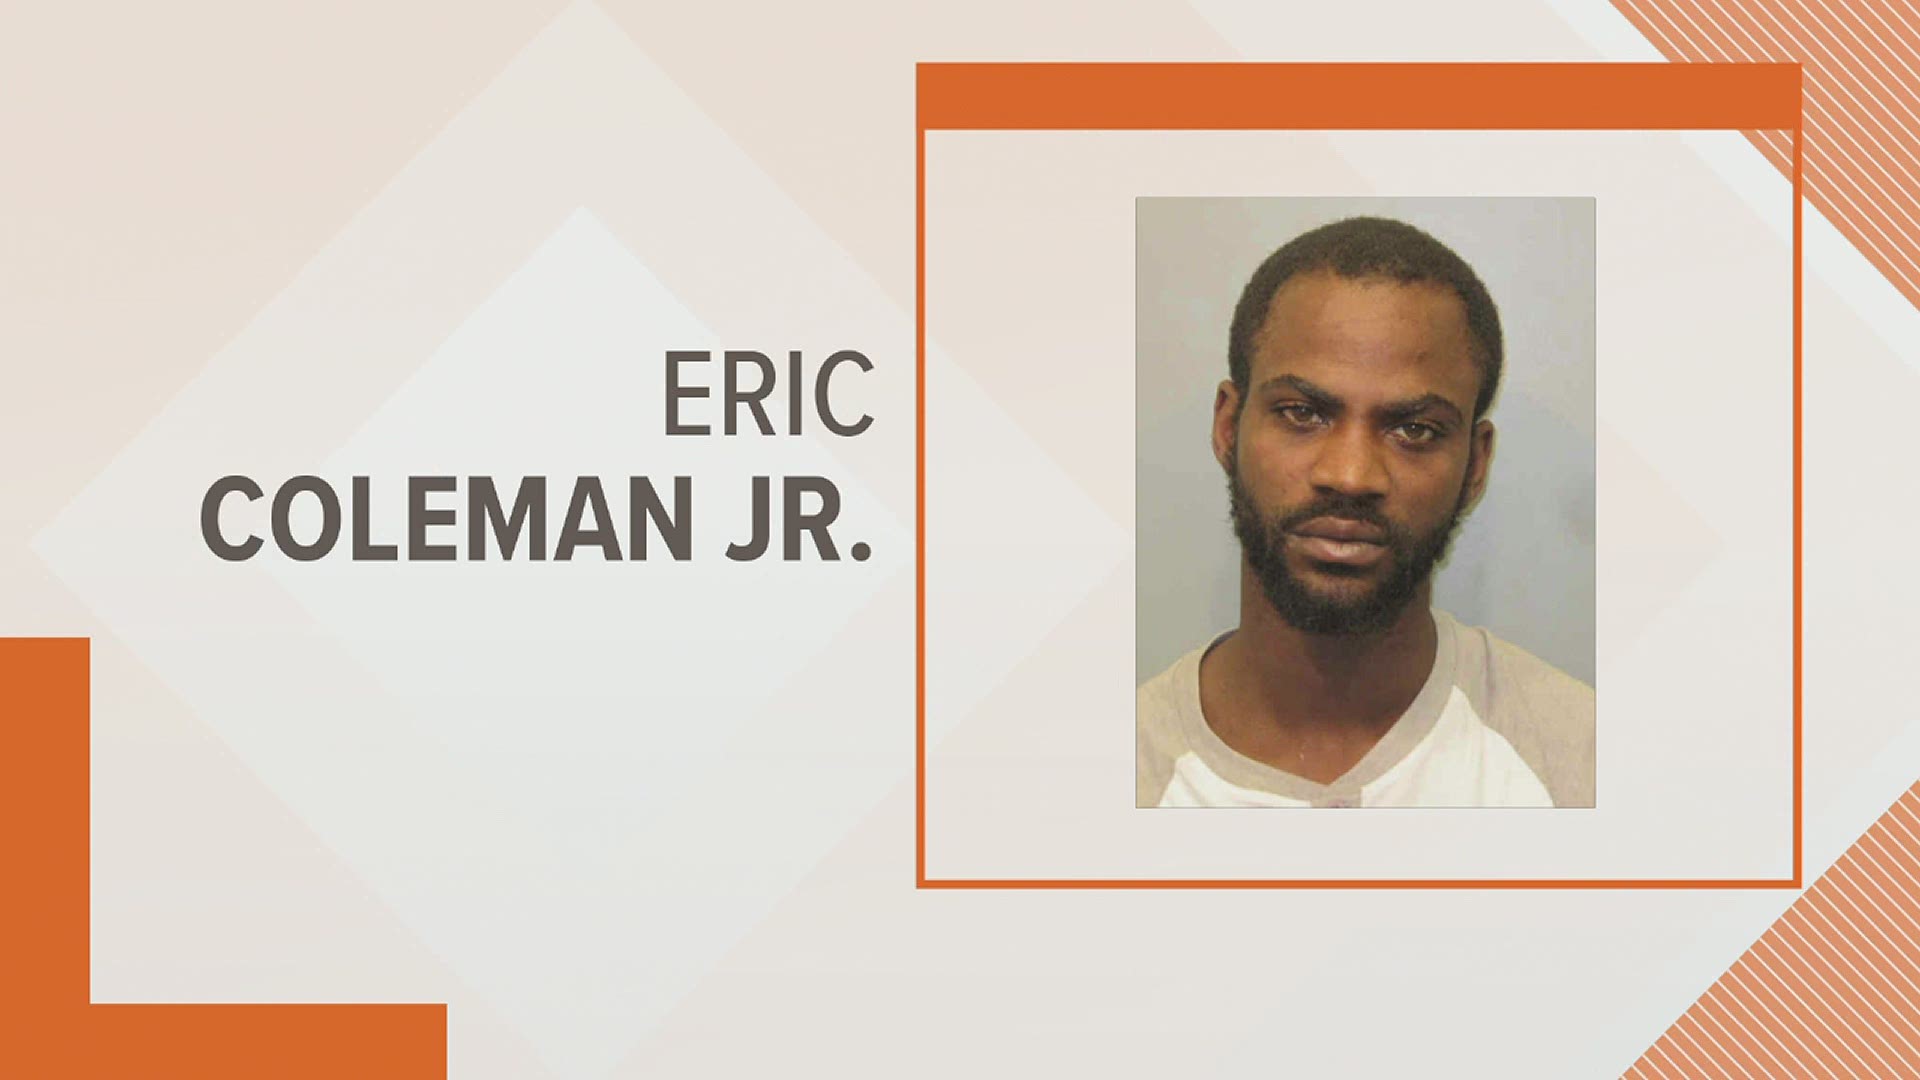 Police say Eric Coleman Jr. was arrested Monday, September 14th.